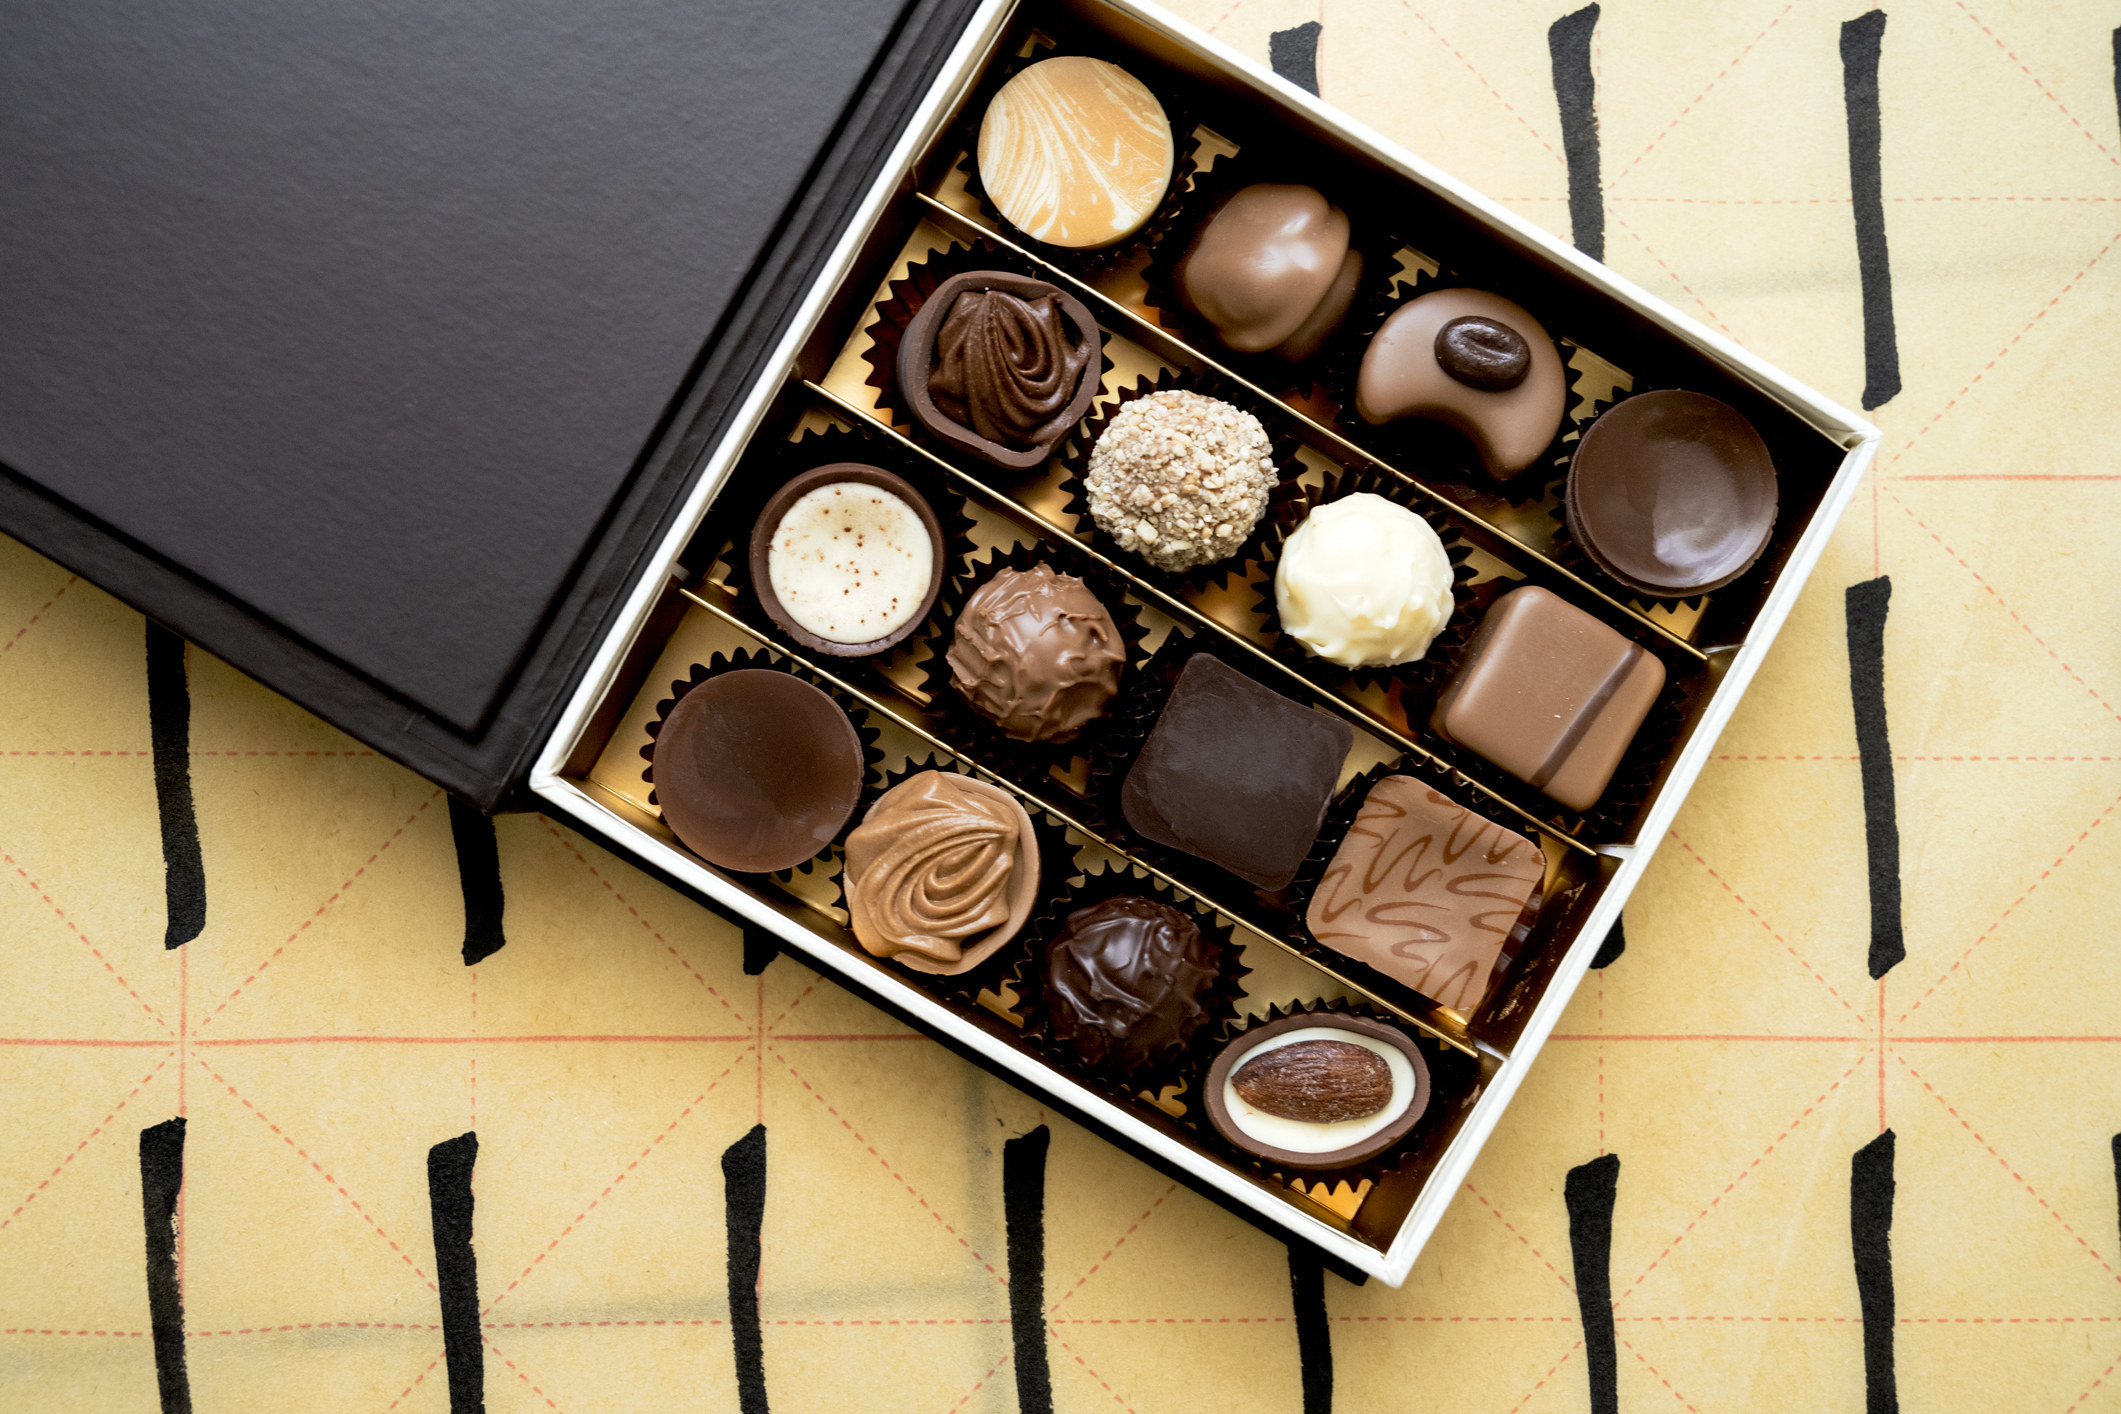 On a table lays a box of assorted chocolates.